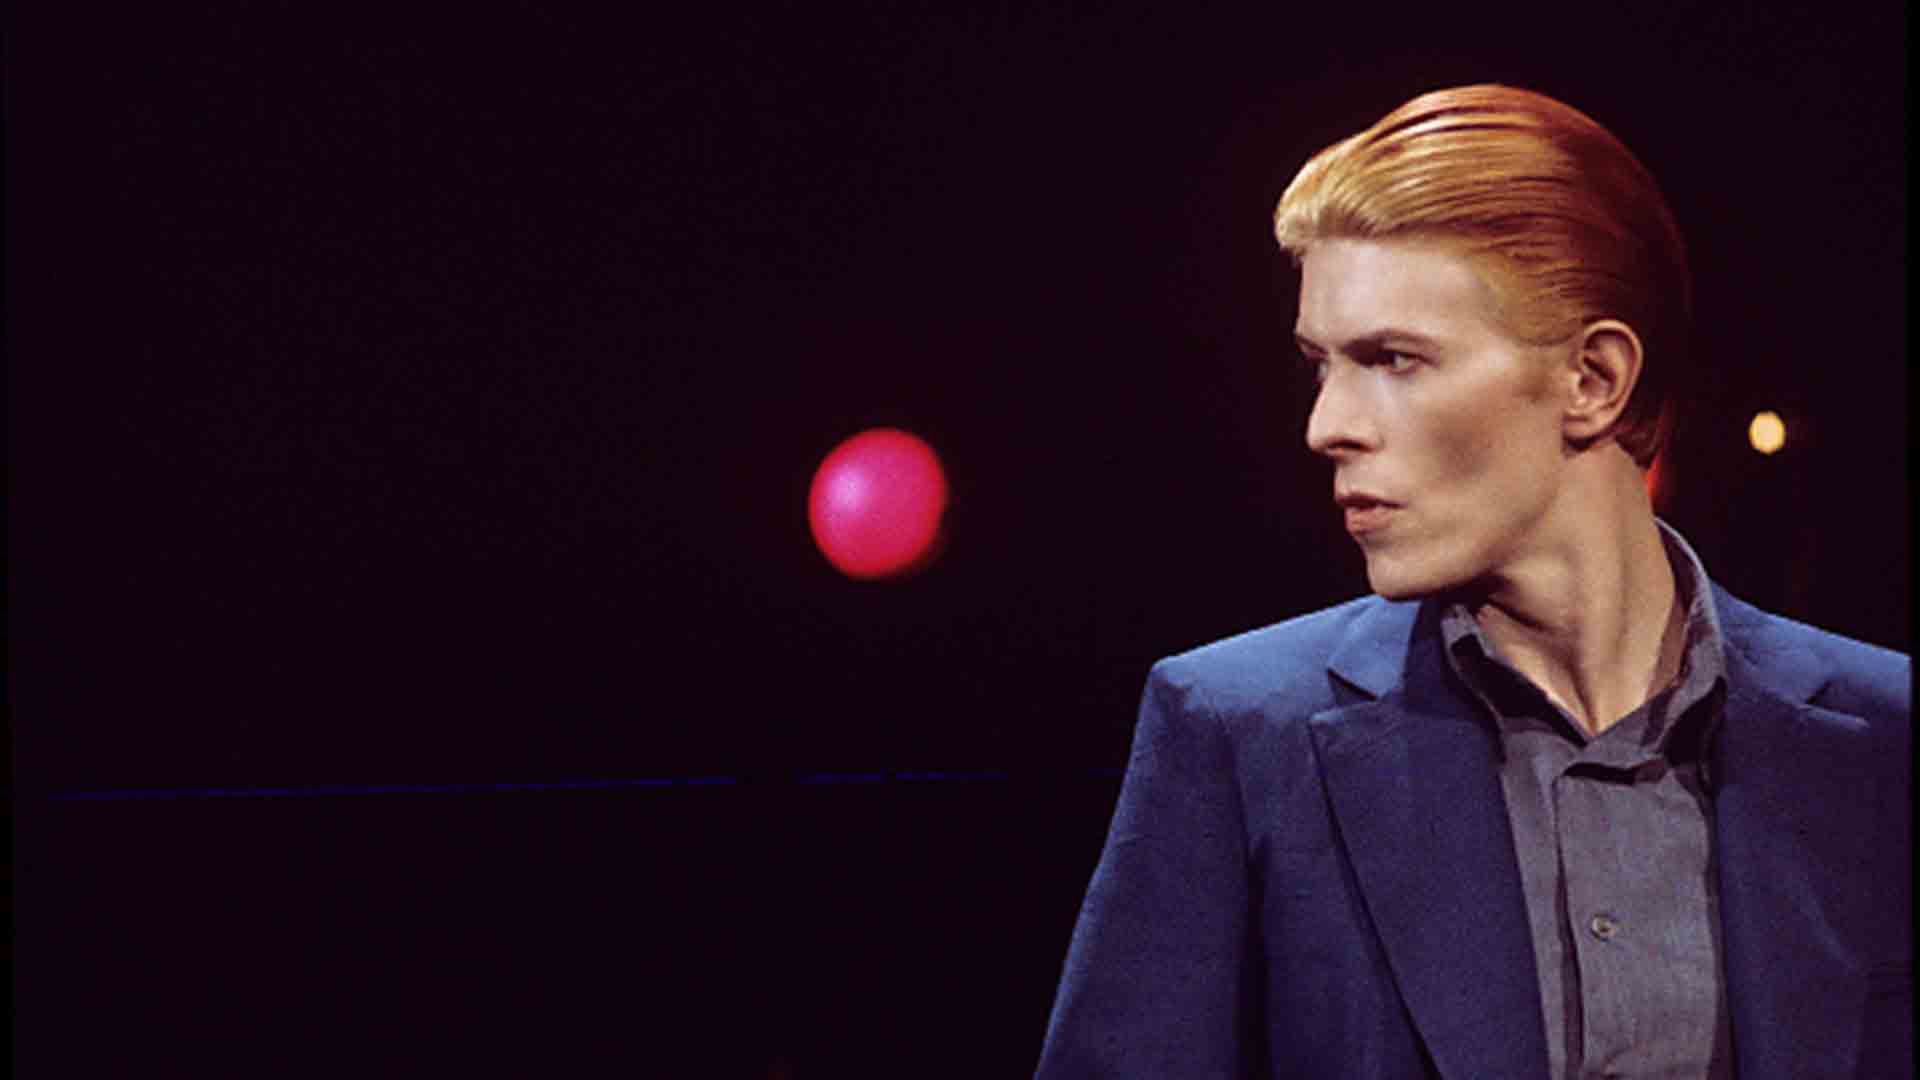 Download David Bowie wallpapers for mobile phone free David Bowie HD  pictures